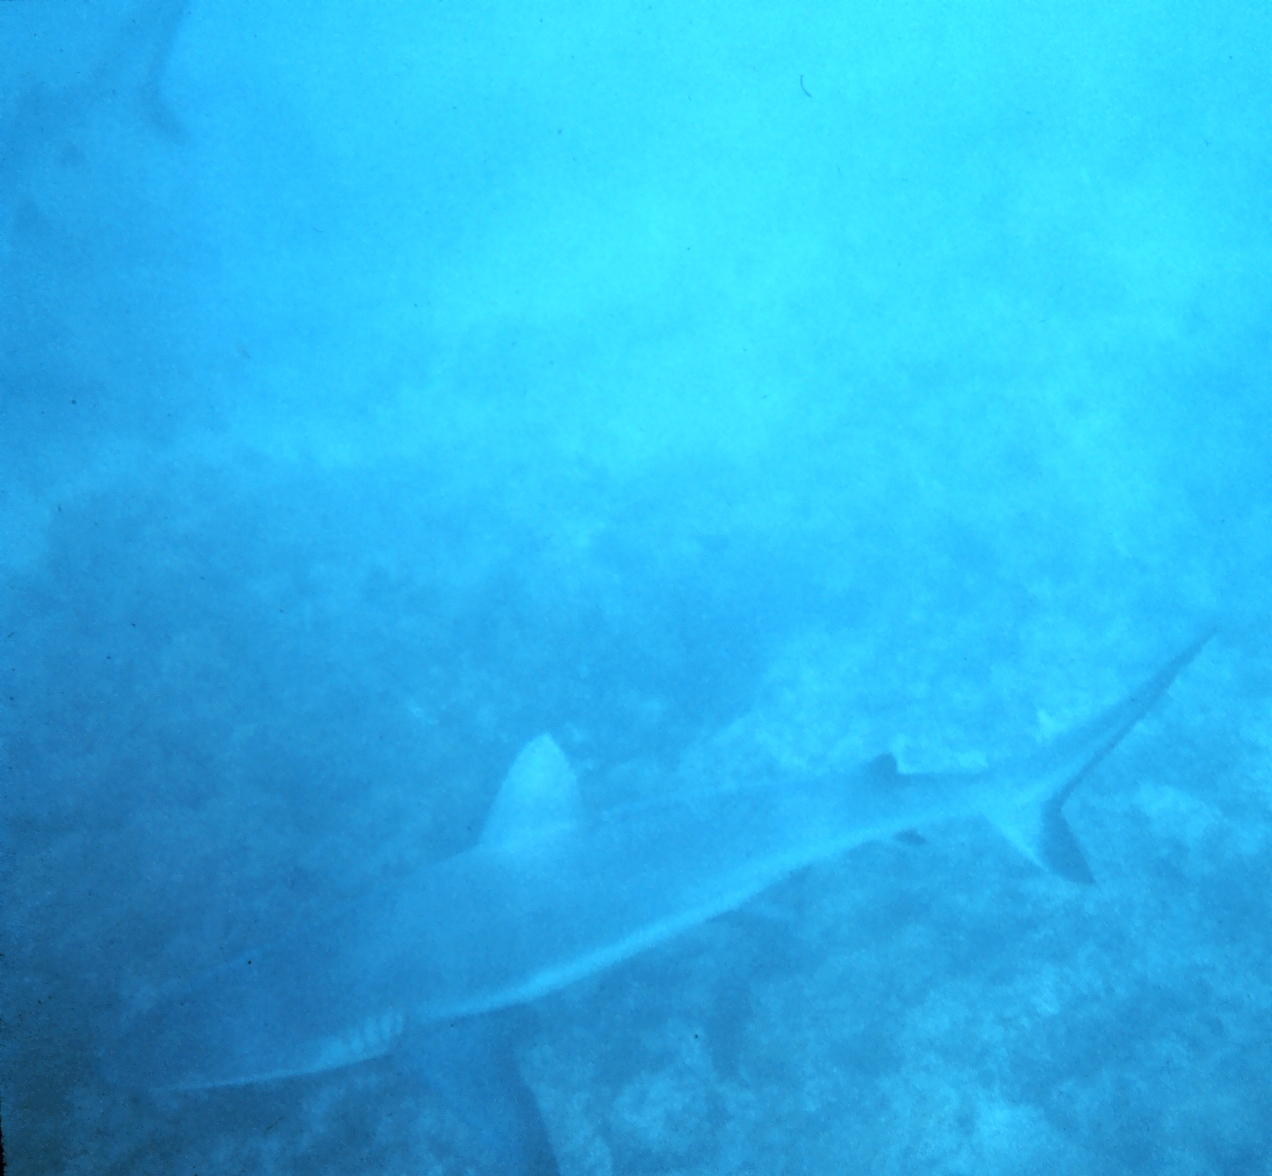 Large shark with tail of another visible in upper left corner